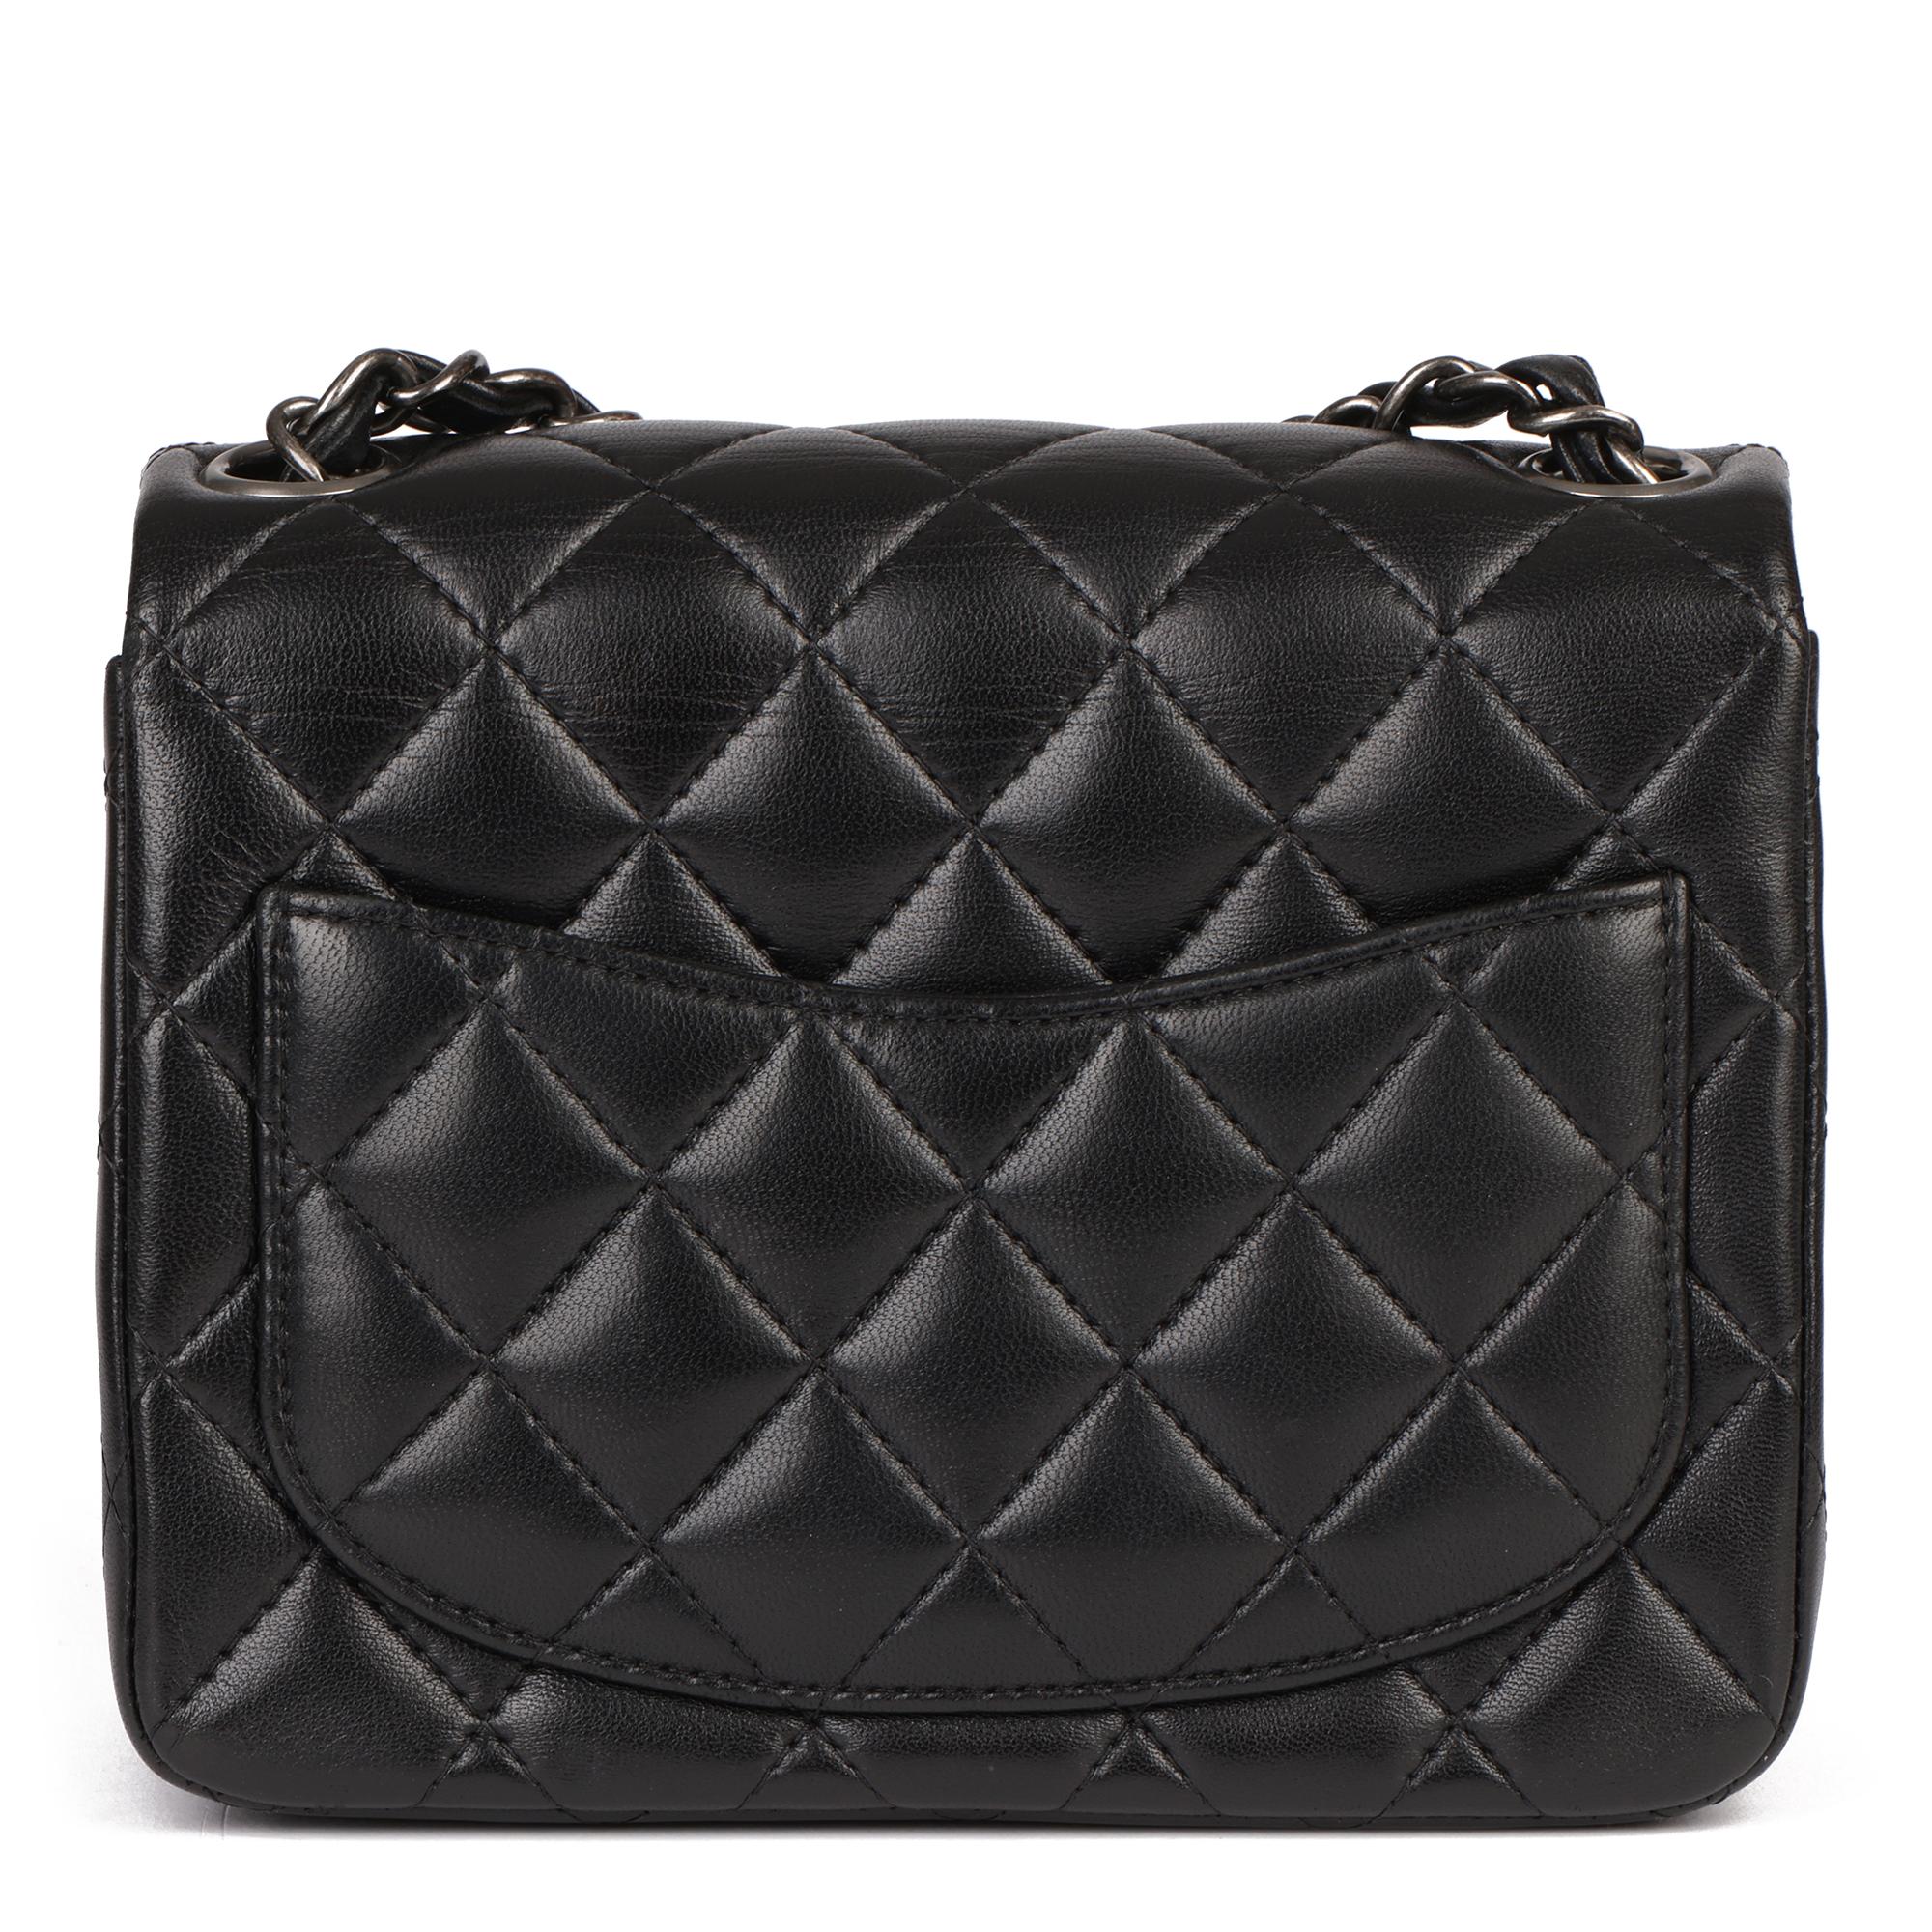 Chanel 2015 Black Quilted Lambskin Leather Mini Flap Bag 3